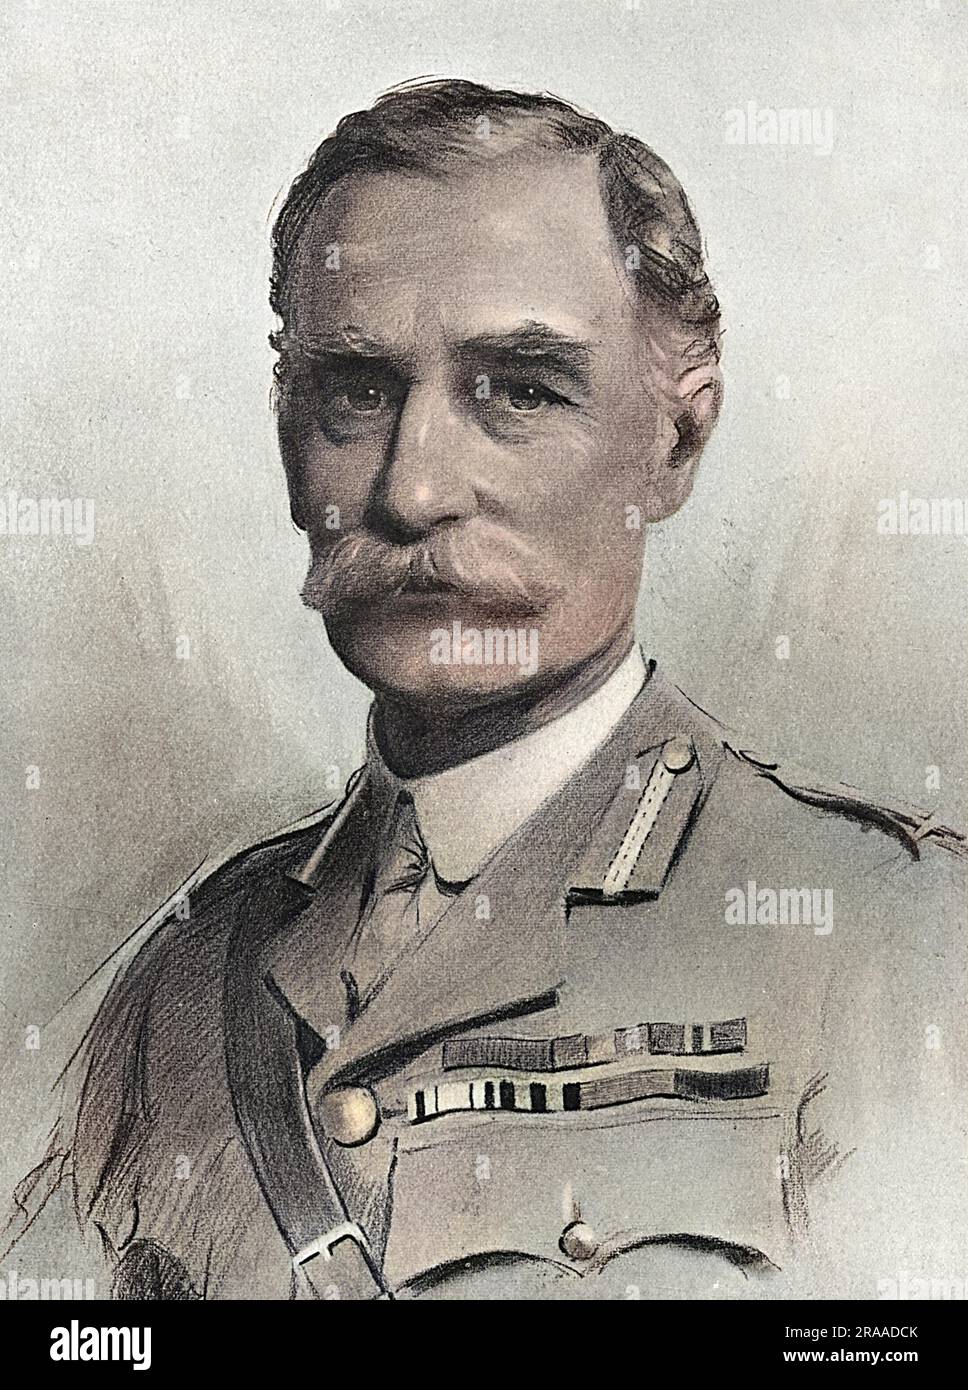 Major-General Sir John Steevens, KCB, KCMG (1855-1925), British Army Director of Equipment and Ordnance Stores during the First World War.  He war service dated back to the Zulu War of 1879 and the Egyptian Campaign of 1882.  After just thirteen year's service he reached the rank of lieutenant-colonel and eleven years later became Principal Ordnance Officer at Woolwich, an appointment he held throughout the Boer War (1899-1902).  He held th appointment of Inspector-General of Ordnance Services, and subsequently Director of Artillery at the War Office from 1893-1898.     Date: 1917 Stock Photo